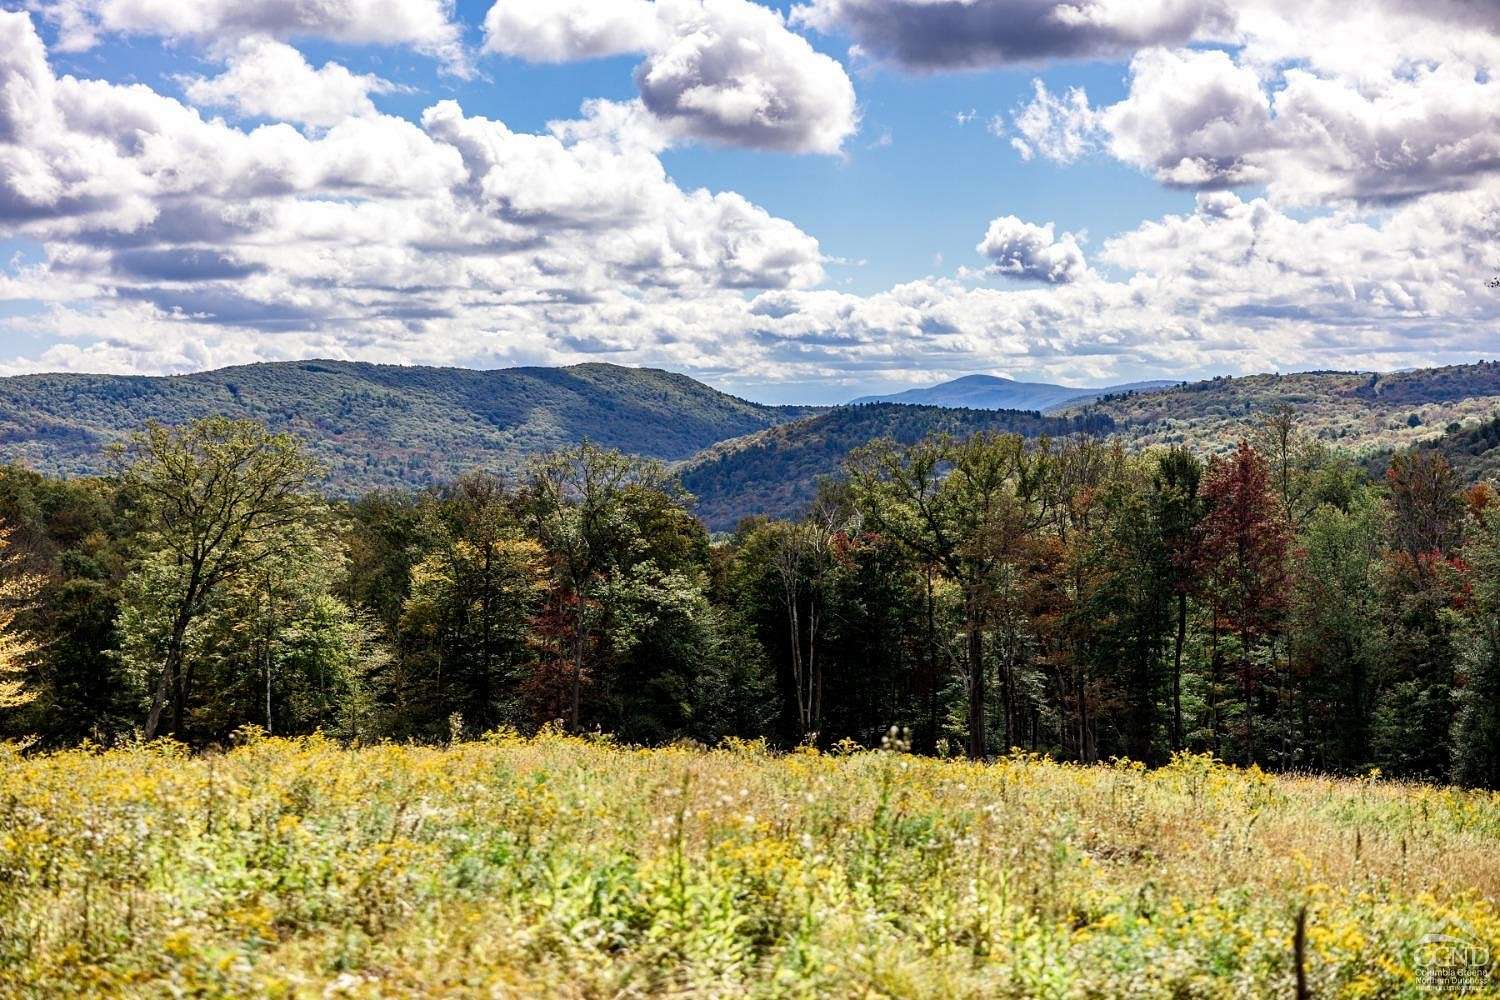 228 Acres of Land for Sale in Austerlitz, New York